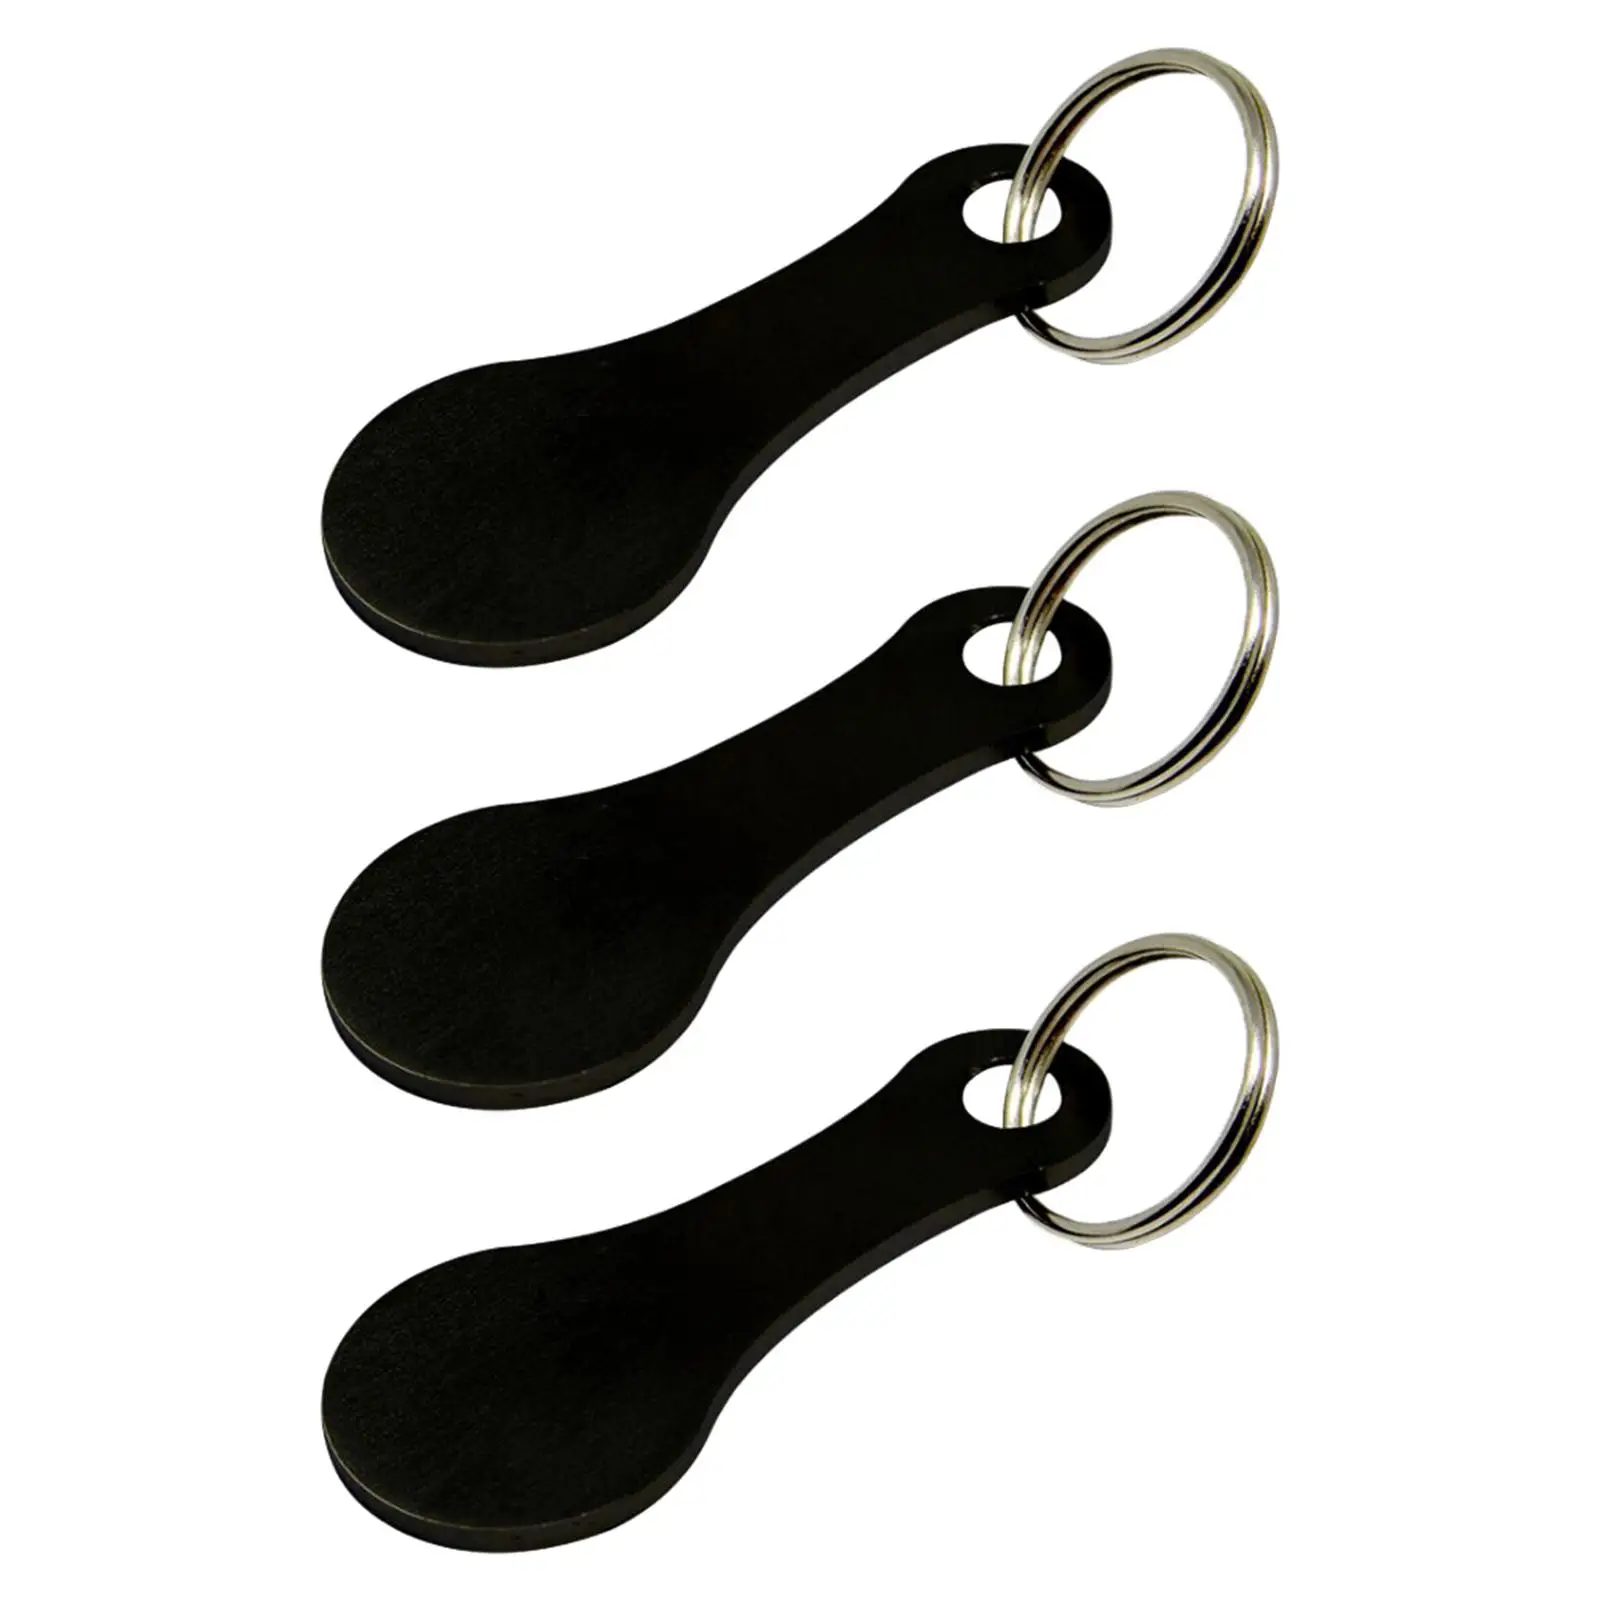 3x DIY Shopping Trolley Tokens Release Keys Portable Shopping Trolley Chips Metal Key Rings for Coin Holder Grocery Cart Change